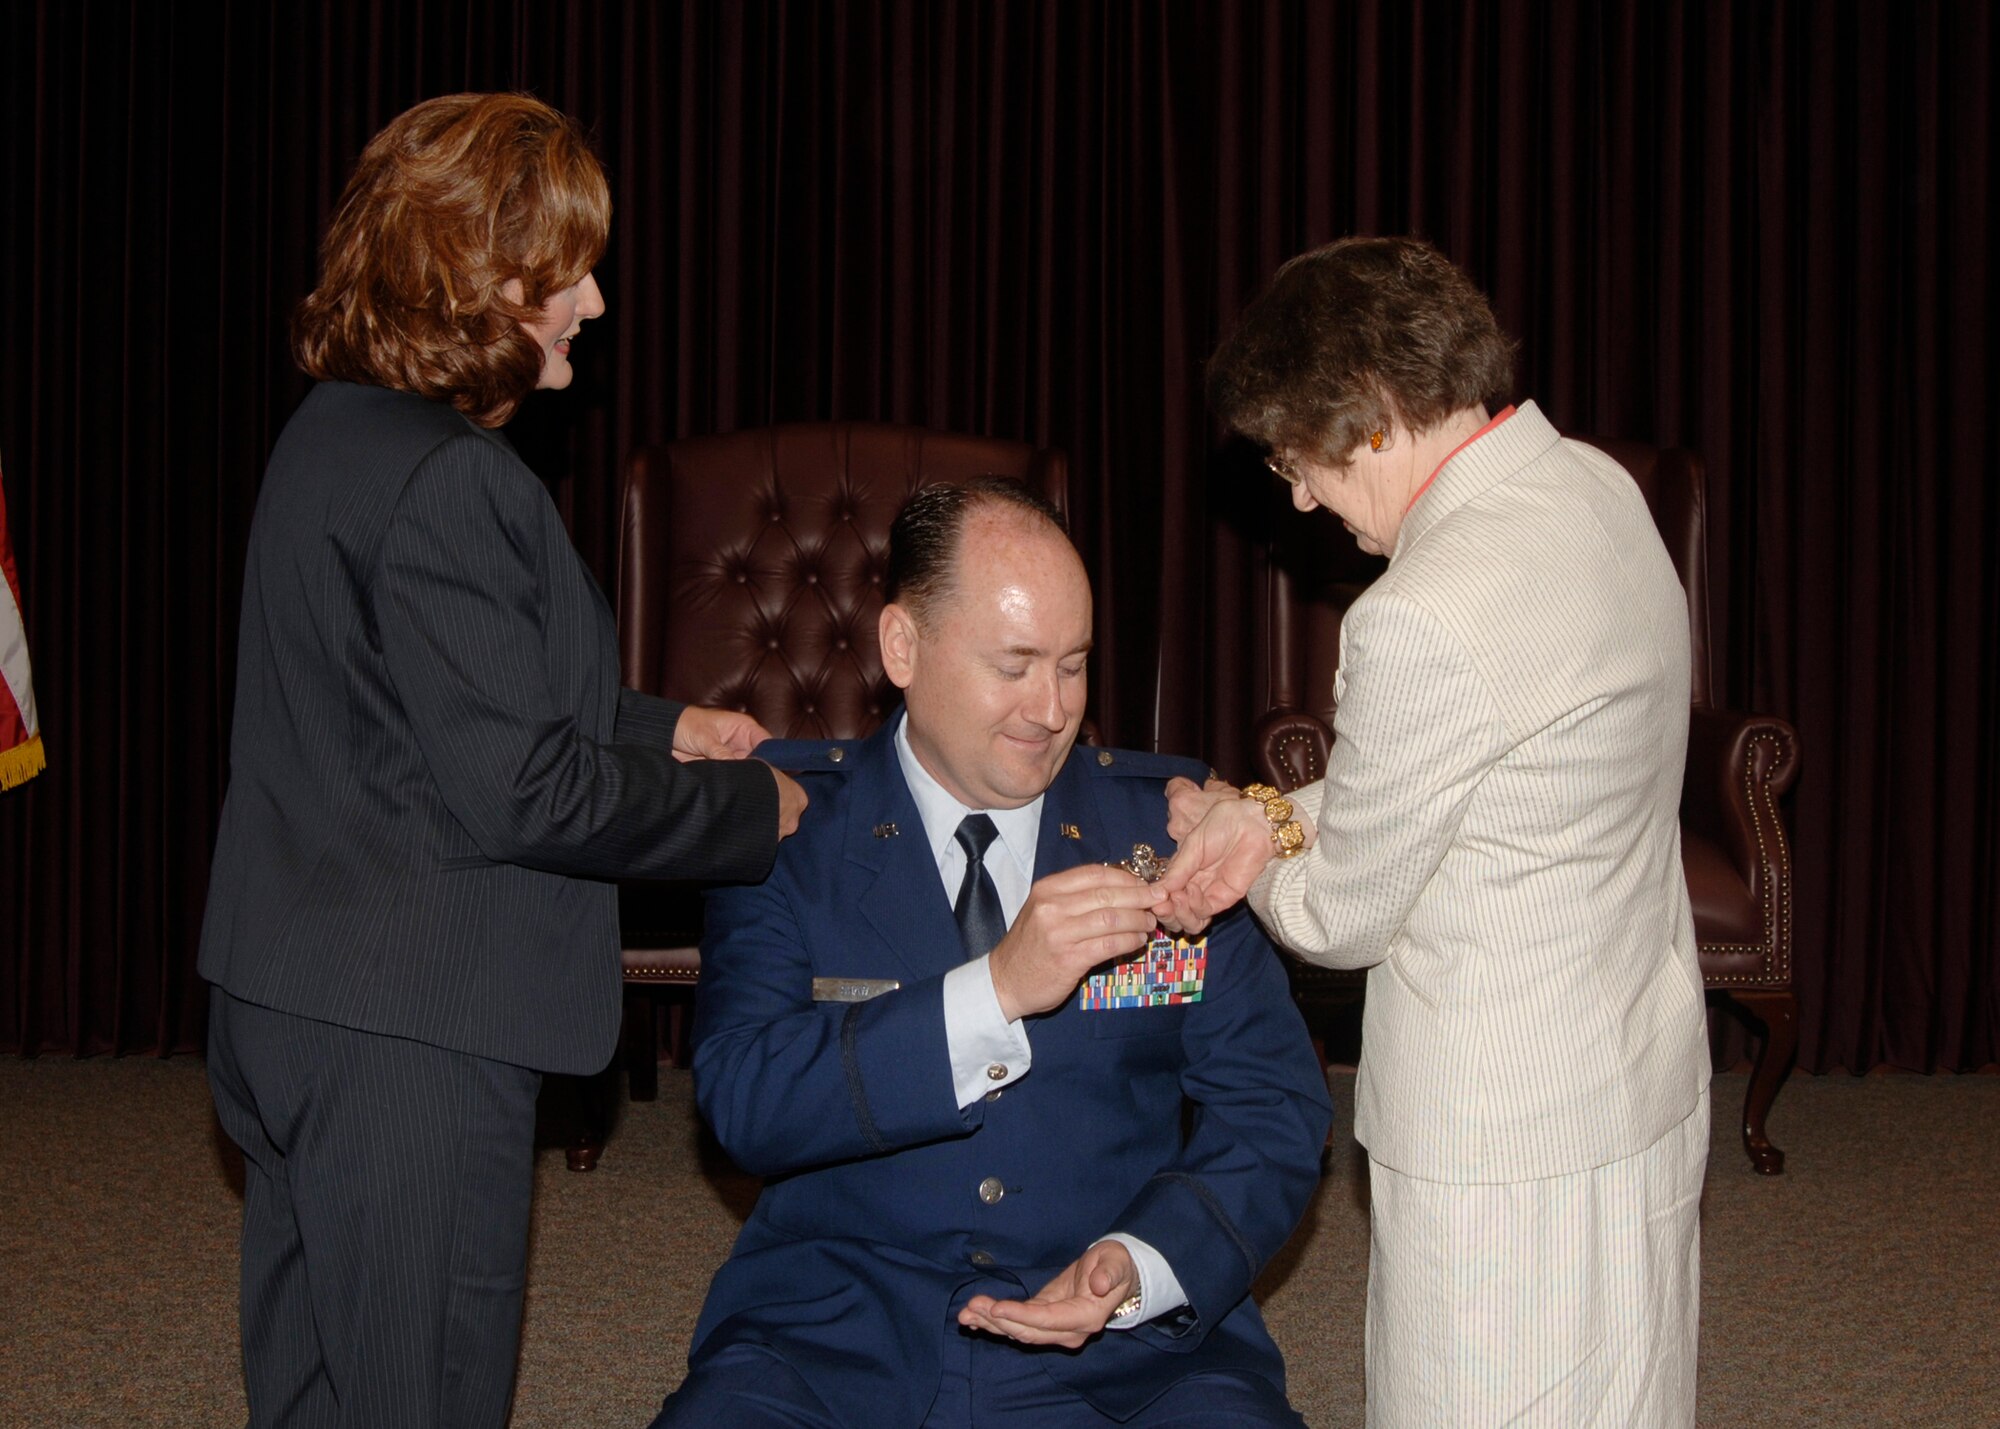 Lt. Col. Stuart Shaw, 22nd Operations Group vice commander, pin on colonel during his promotion ceremony, May 1, at the 384th Air Refueling Squadron auditorium.  His wife, Penny, and mother, Mary Shaw, do the honors. (photo by Airman 1st Class Jessica Corob)